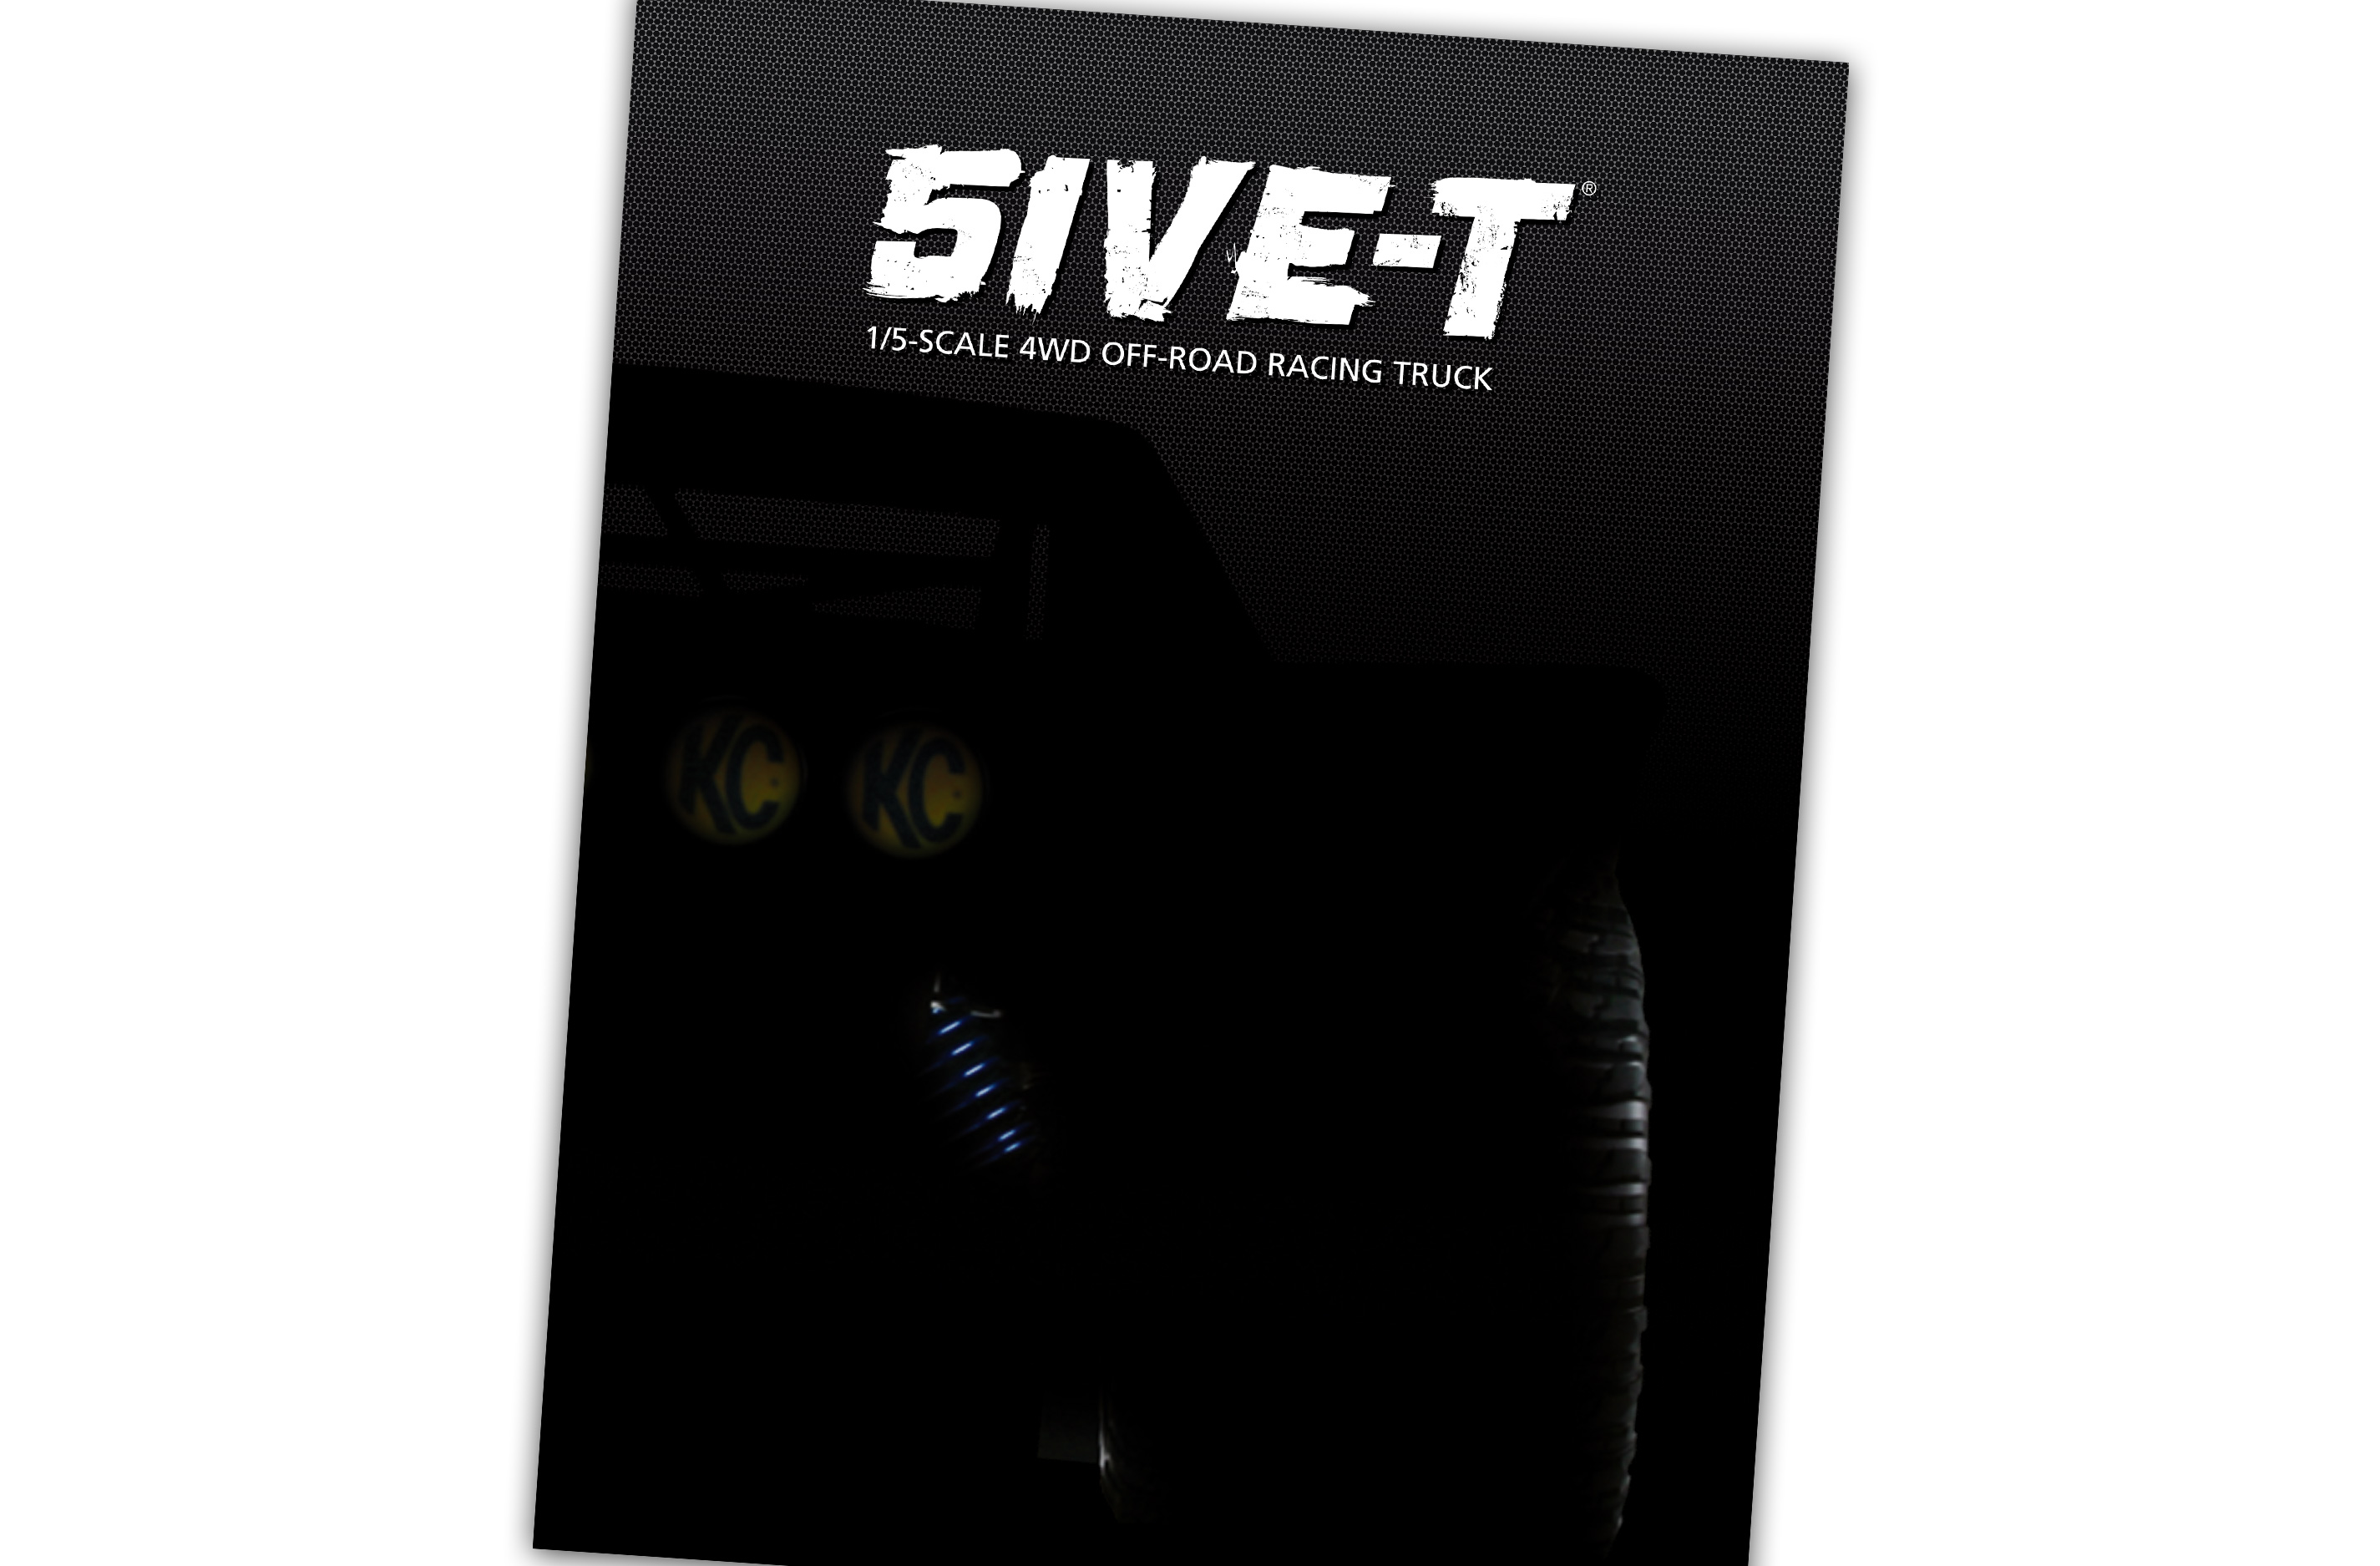 LOS05001/09 Instruction Manual for 5ive-T